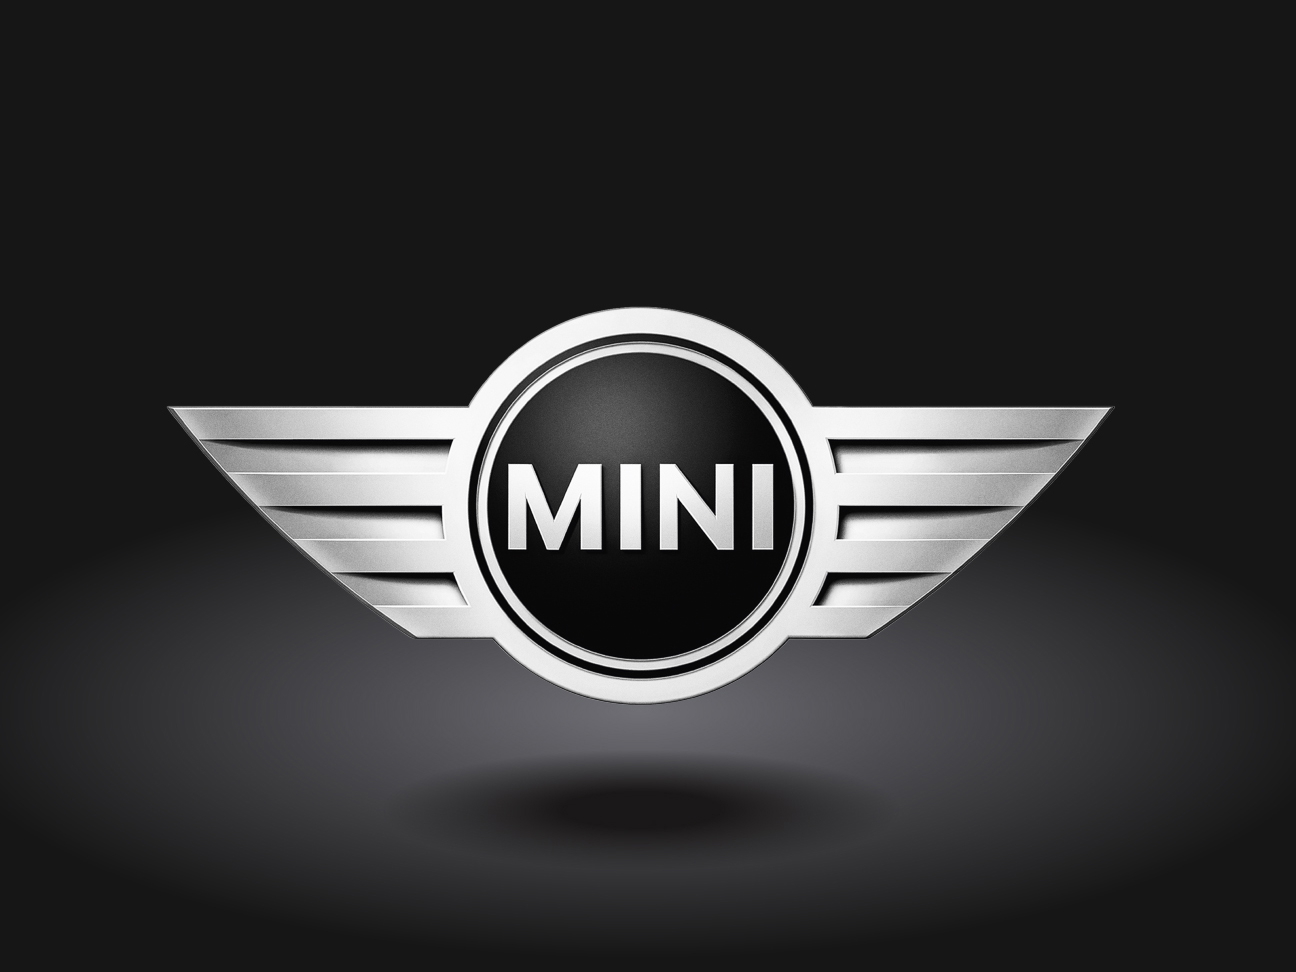 Mini: How do you drive your coffee